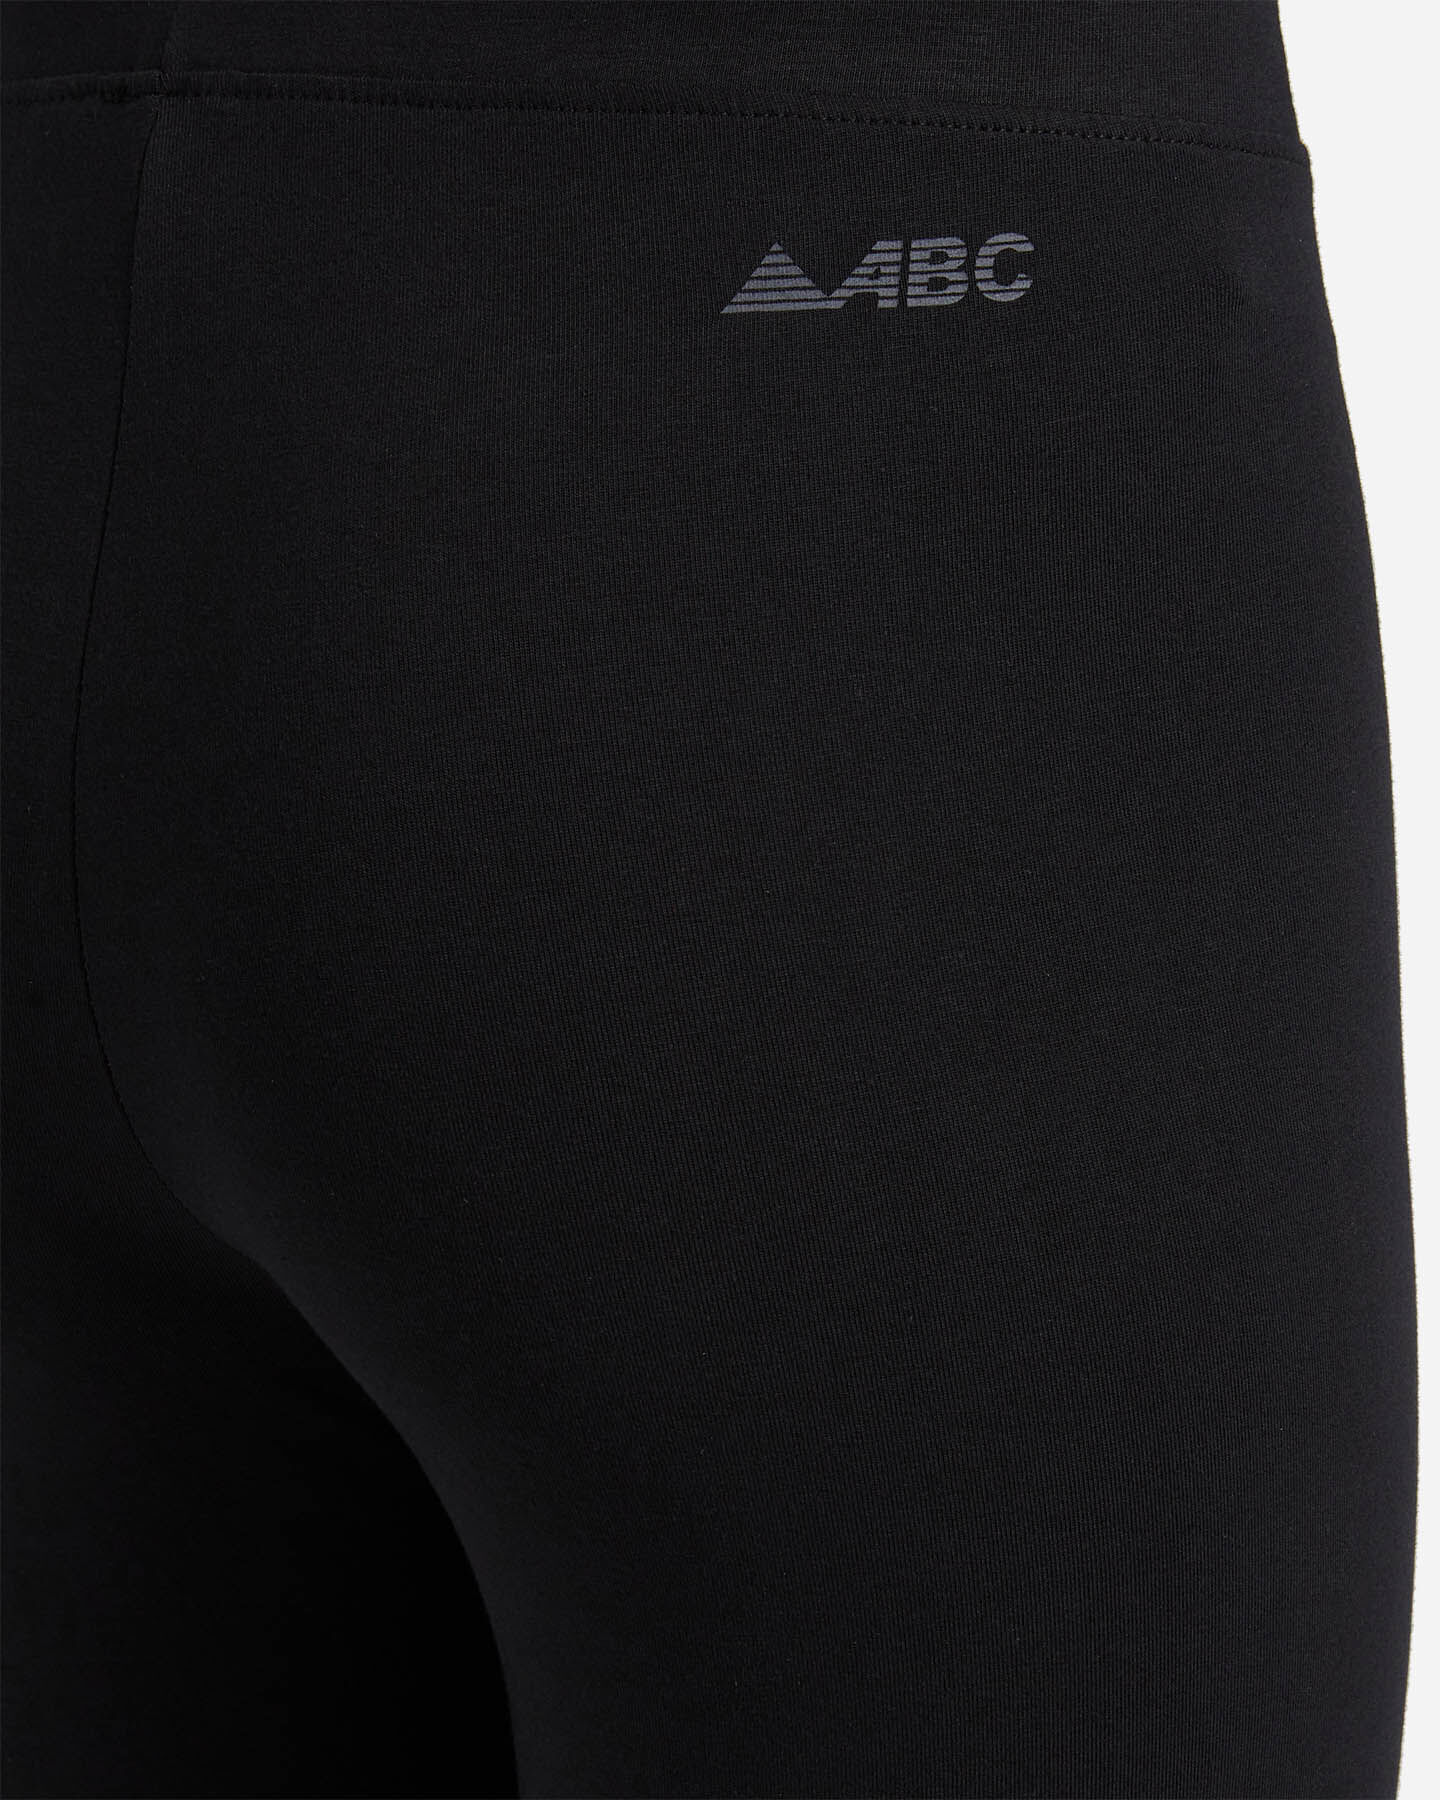  Leggings ABC JSTRETCH  W S5296340|050|XS scatto 3